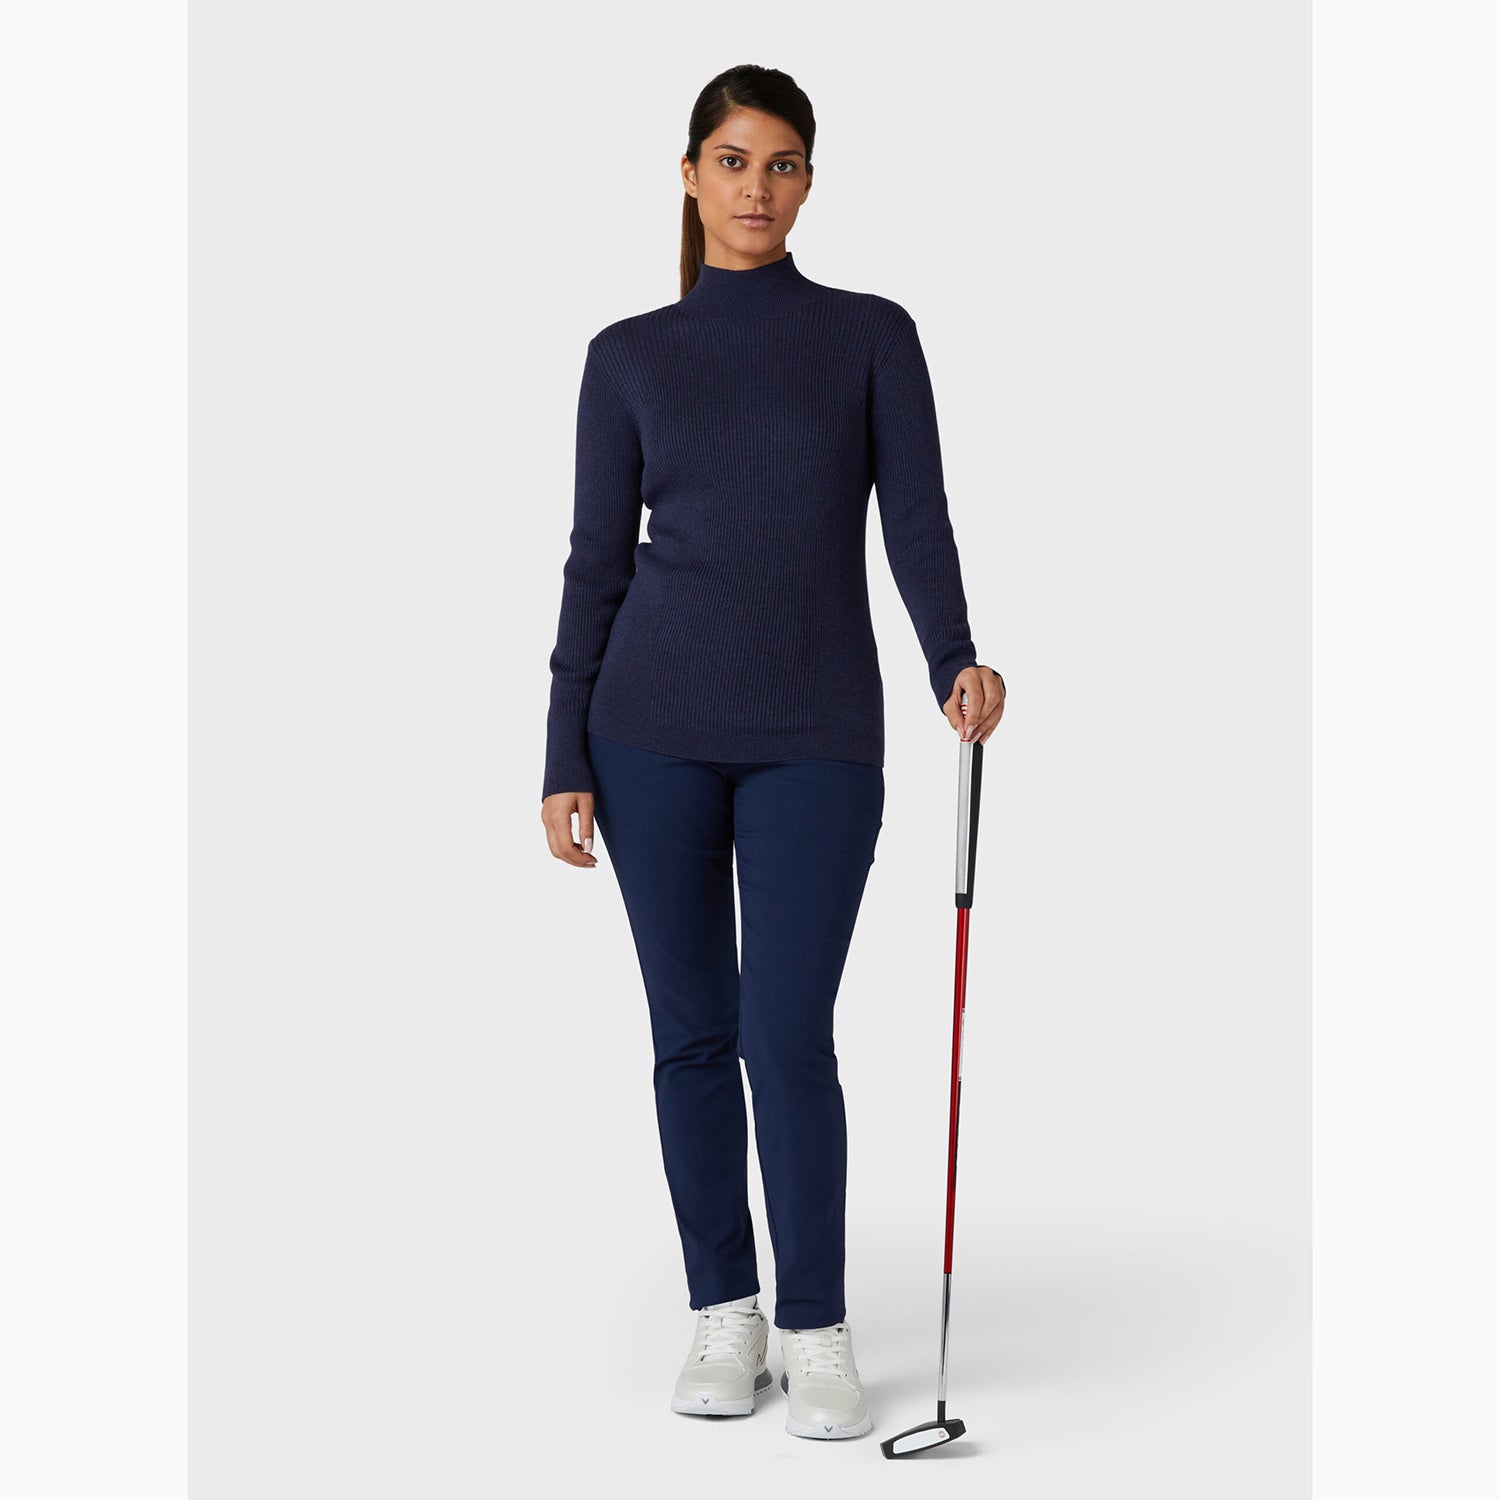 Callaway Ladies High Mock Neck Ribbed Sweater in Navy Heather